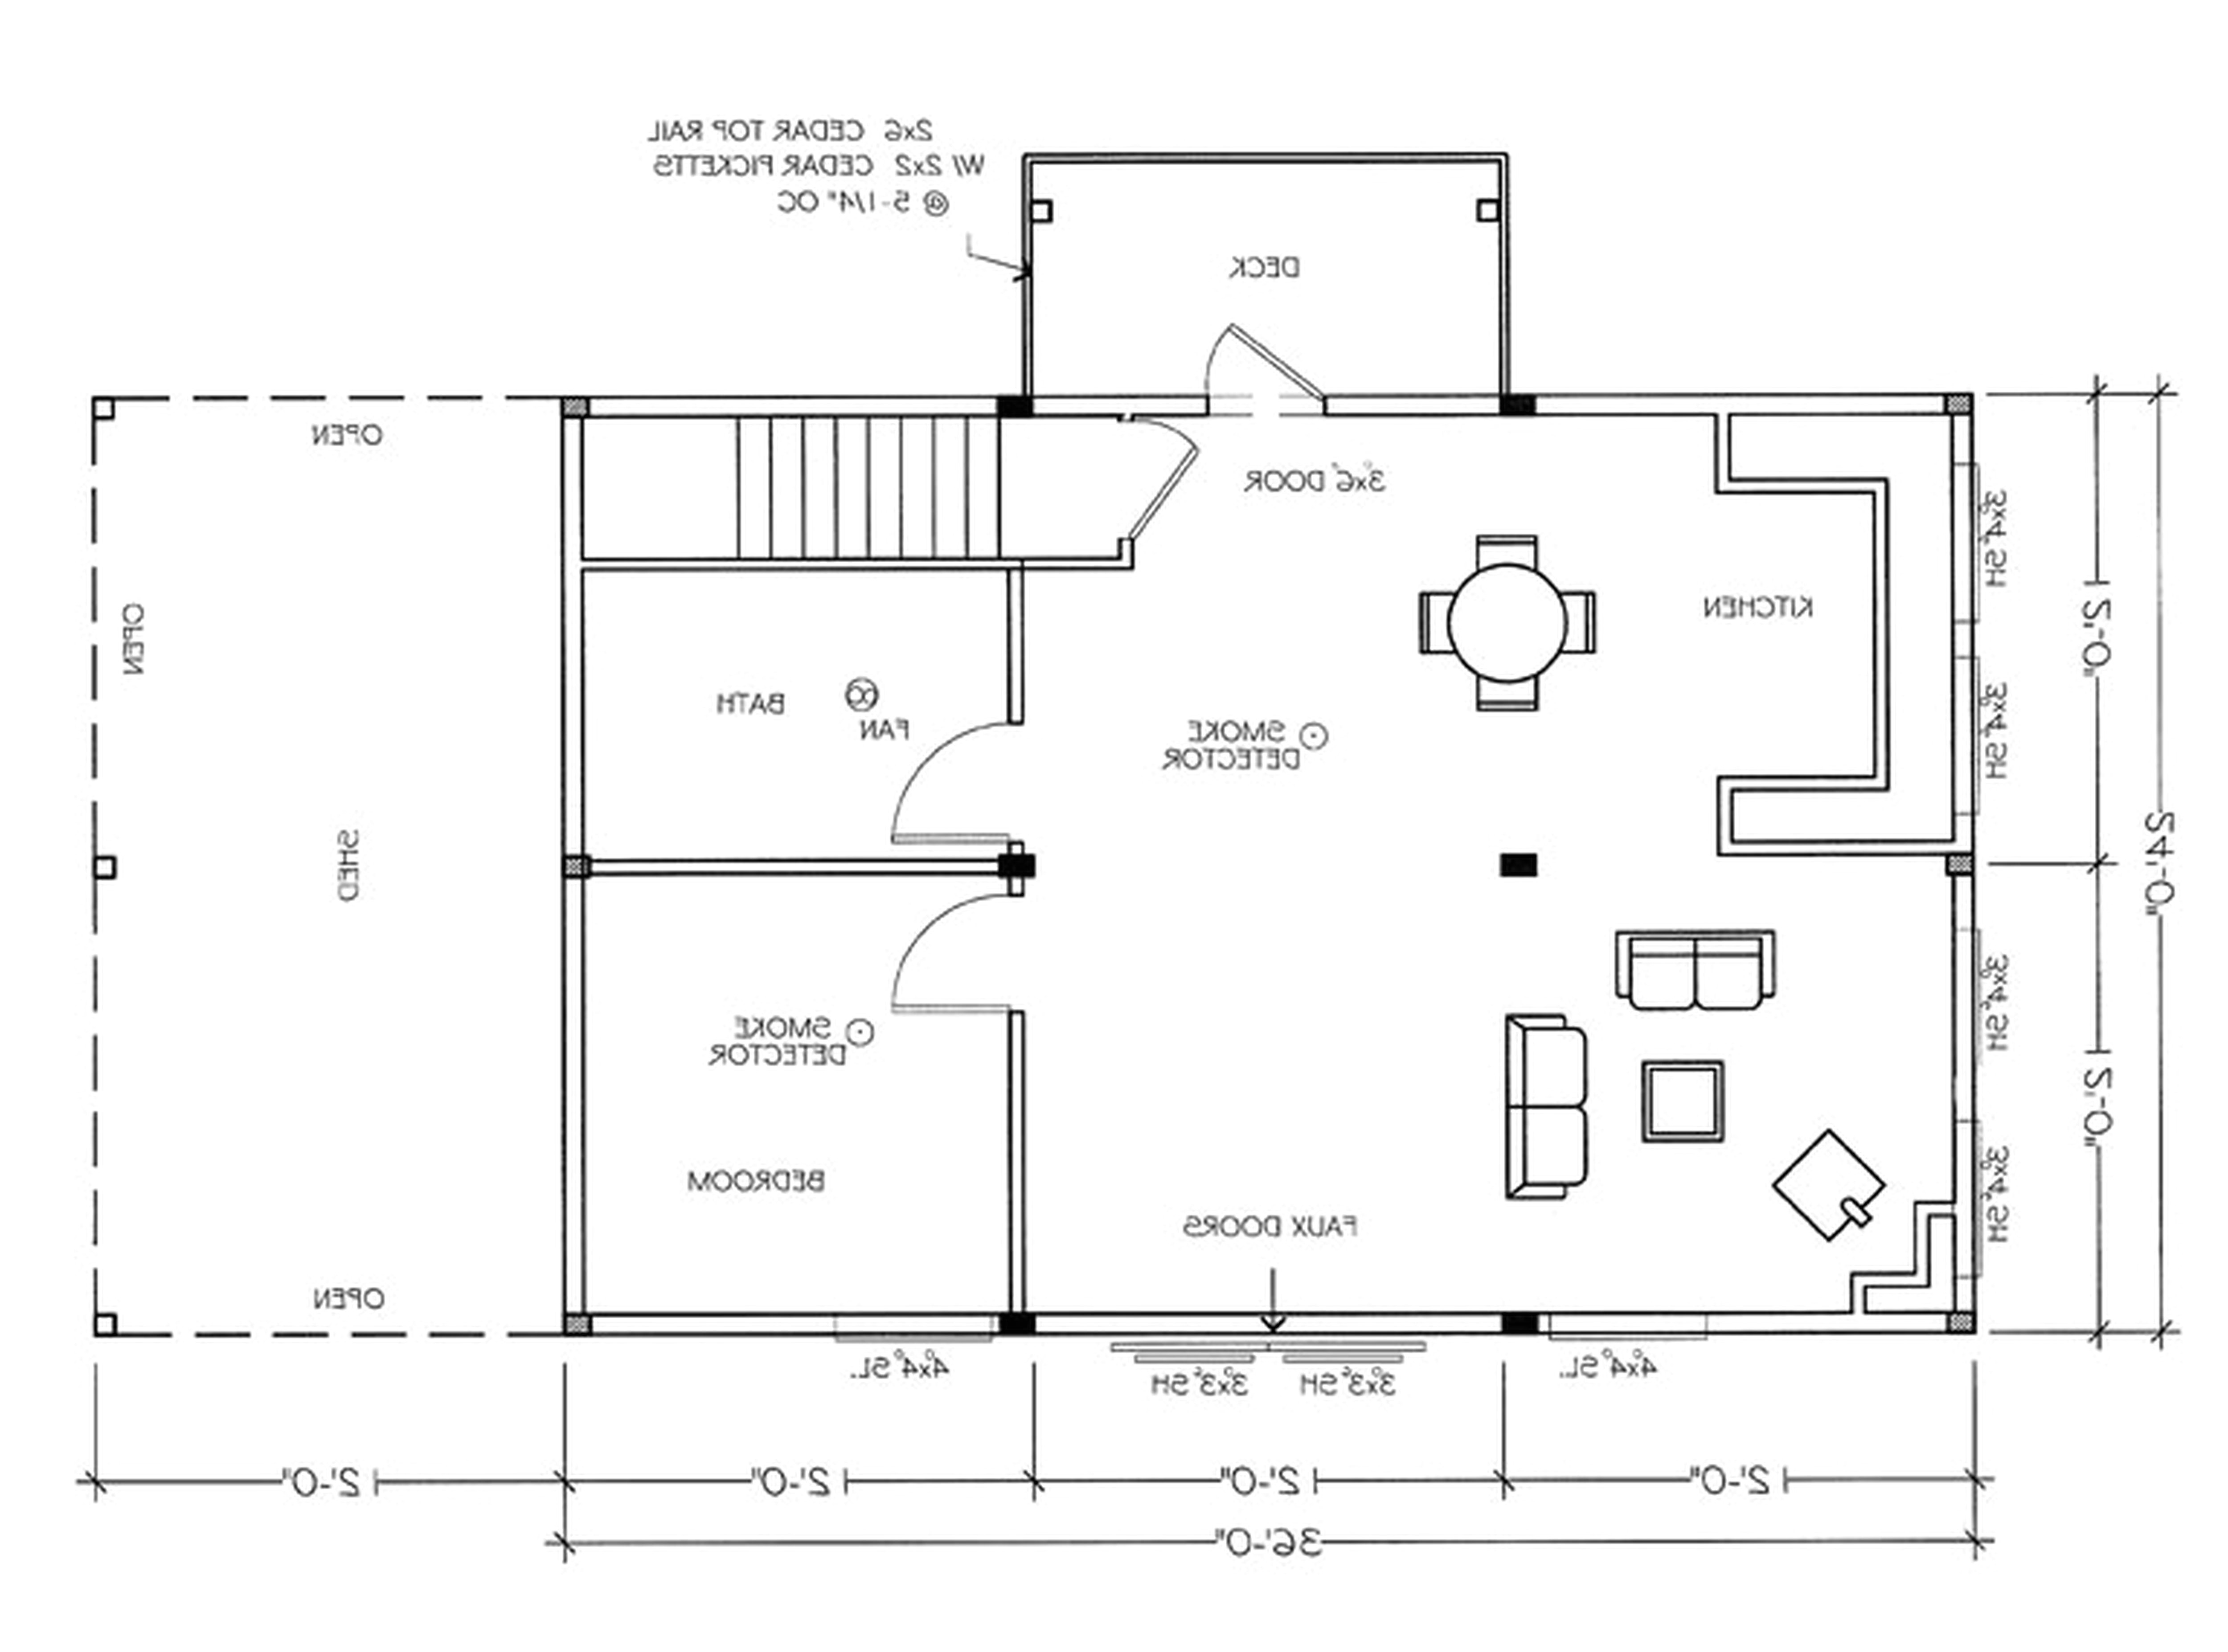 View House Plans Online Draw House Floor Plans Online